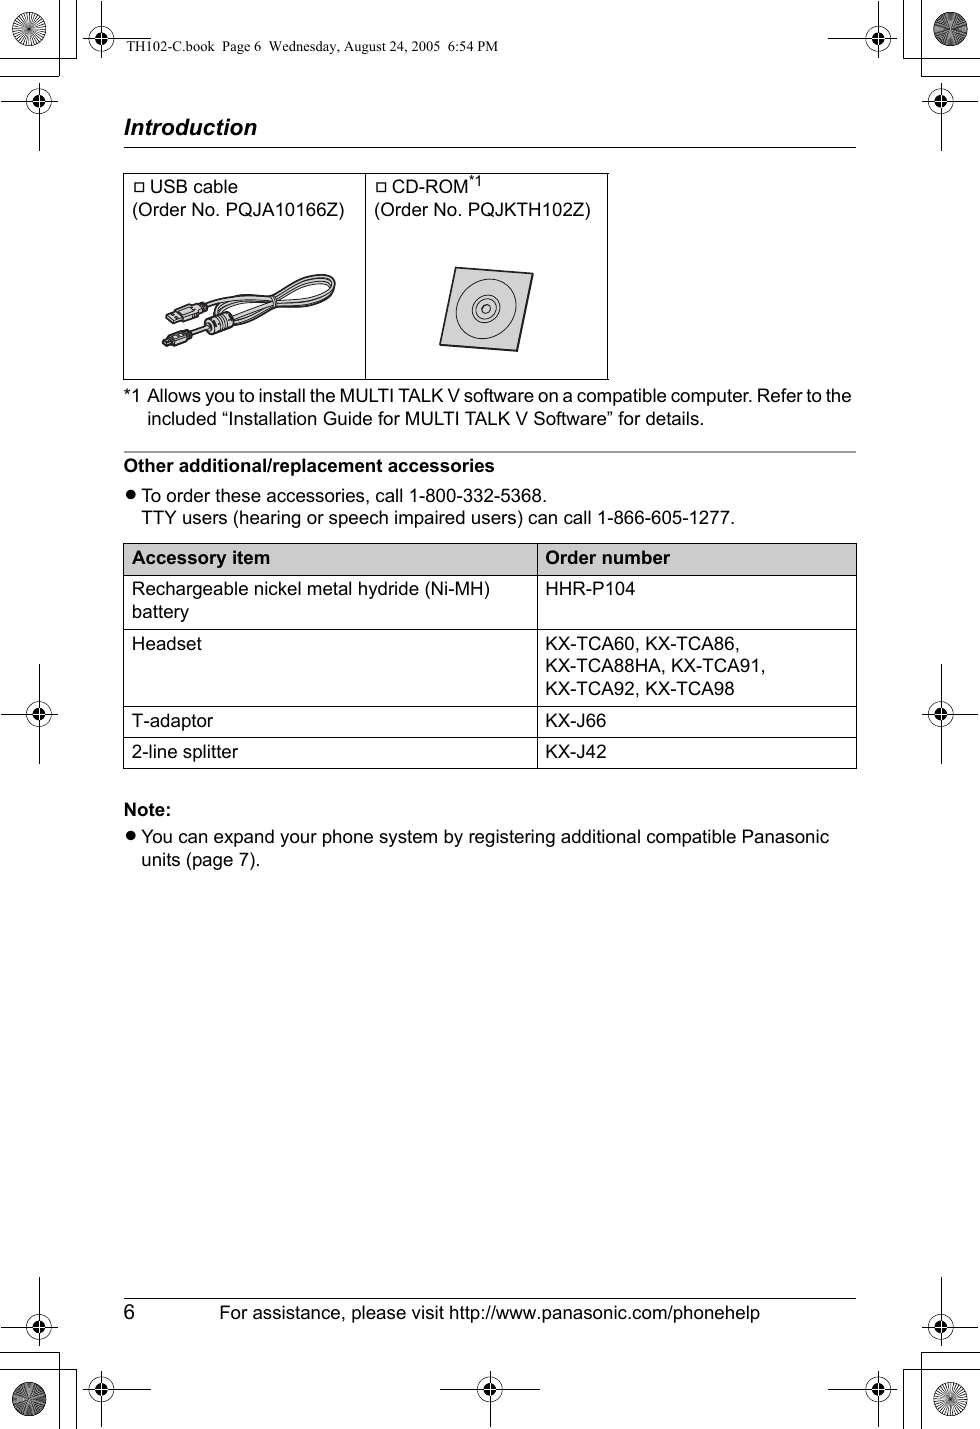 Introduction6For assistance, please visit http://www.panasonic.com/phonehelp*1 Allows you to install the MULTI TALK V software on a compatible computer. Refer to the included “Installation Guide for MULTI TALK V Software” for details.Other additional/replacement accessoriesLTo order these accessories, call 1-800-332-5368.TTY users (hearing or speech impaired users) can call 1-866-605-1277.Note:LYou can expand your phone system by registering additional compatible Panasonic units (page 7).AUSB cable(Order No. PQJA10166Z)ACD-ROM*1(Order No. PQJKTH102Z)Accessory item Order numberRechargeable nickel metal hydride (Ni-MH) batteryHHR-P104Headset KX-TCA60, KX-TCA86, KX-TCA88HA, KX-TCA91, KX-TCA92, KX-TCA98T-adaptor KX-J662-line splitter KX-J42TH102-C.book  Page 6  Wednesday, August 24, 2005  6:54 PM